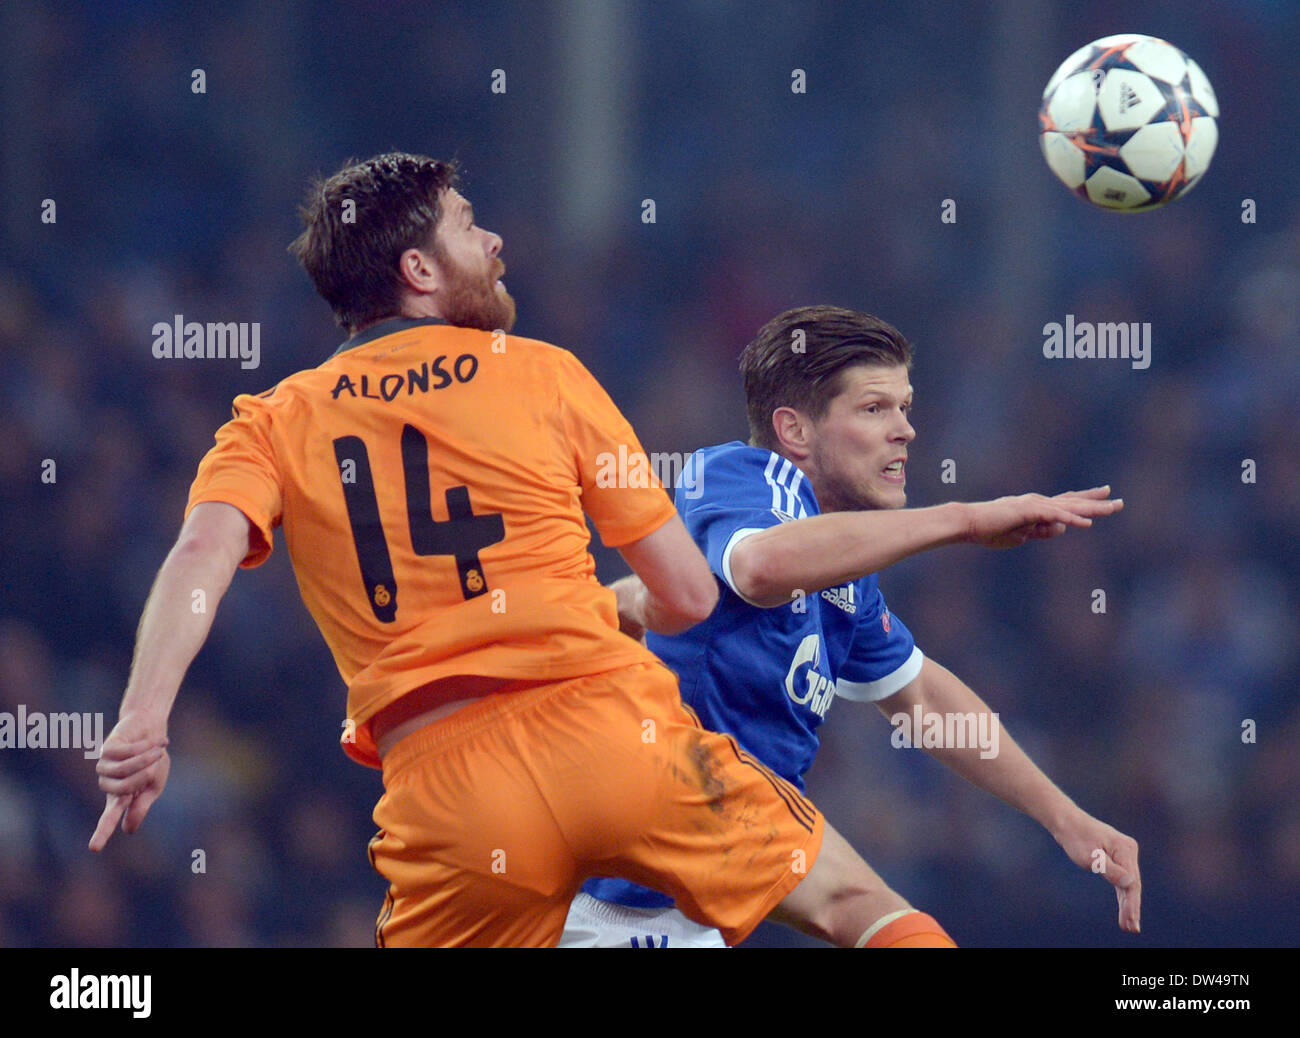 Gelsenkirchen, Germany. 26th Feb, 2014. Madrid's Xabi Alonso (L) vies for the ball with Schalke's Klaas-Jan Huntelaar (R) during the Champions League round of sixteen match between FC Schalke 04 and Real Madrid at Stadium Gelsenkirchen in Gelsenkirchen, Germany, 26 February 2014. Photo: FEDERICO GAMBARINI/dpa/Alamy Live News Stock Photo